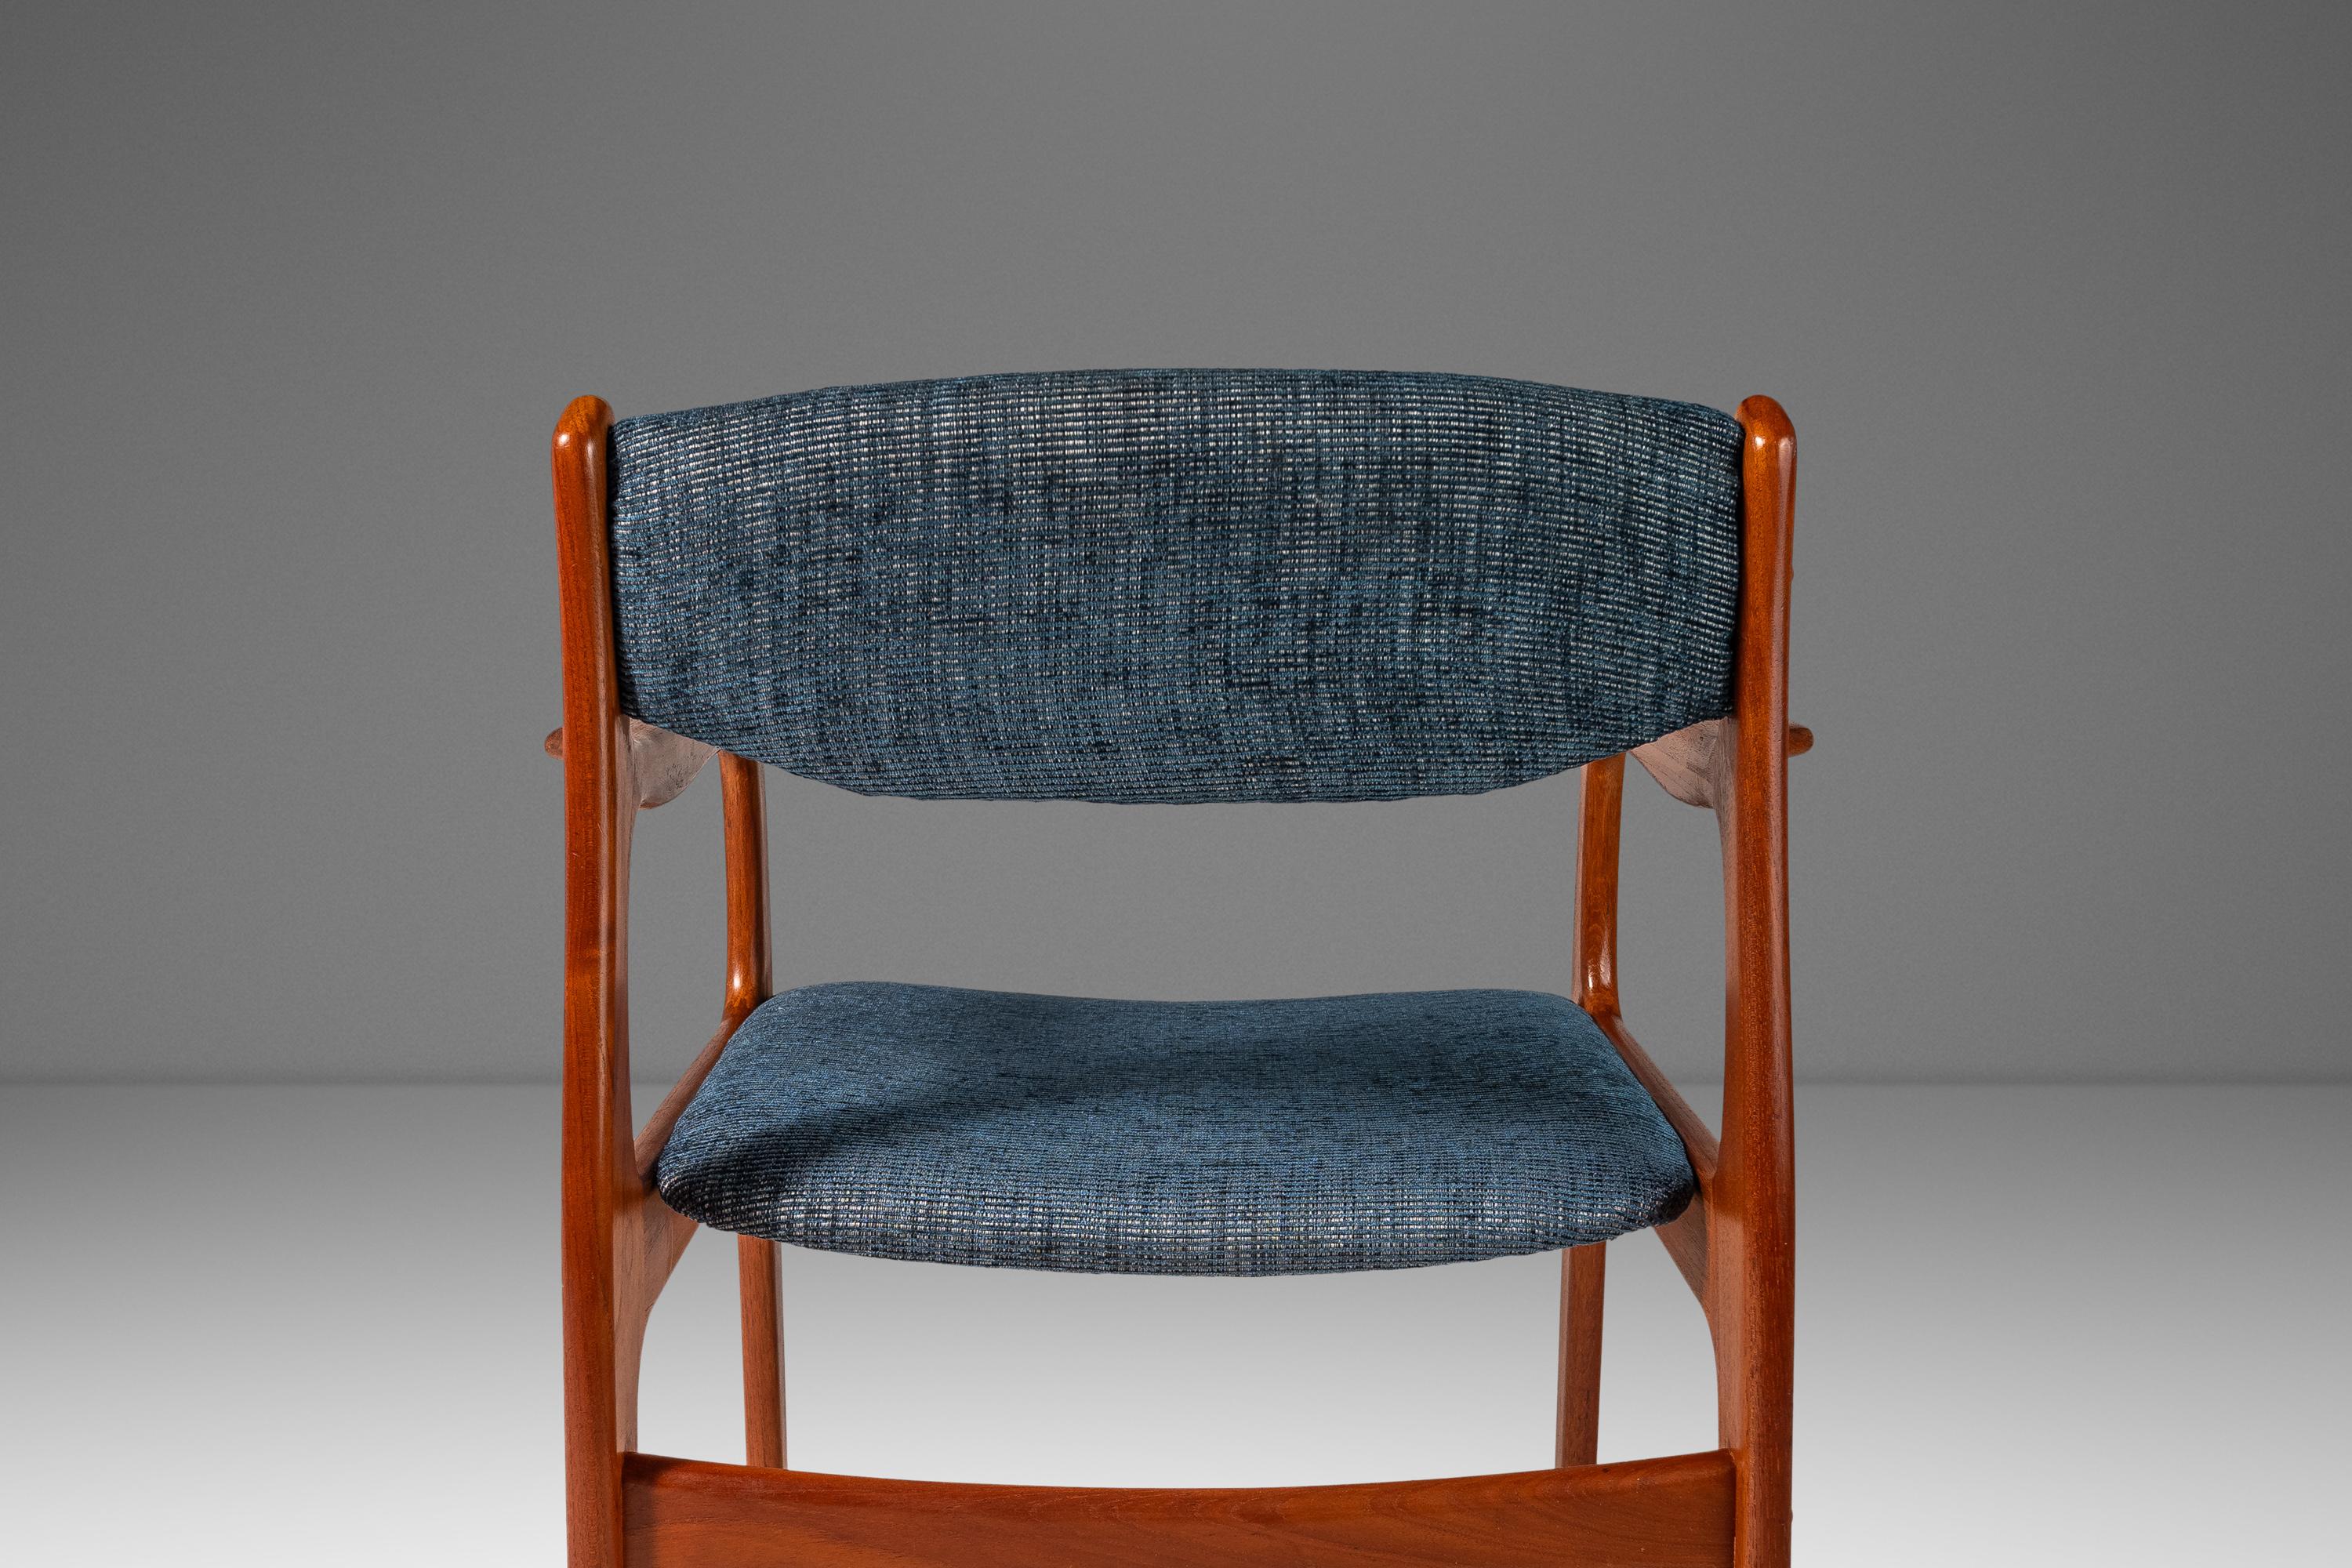 Arm Chair in Solid Teak and New Upholstery by Benny Linden Designs, c. 1970s For Sale 8